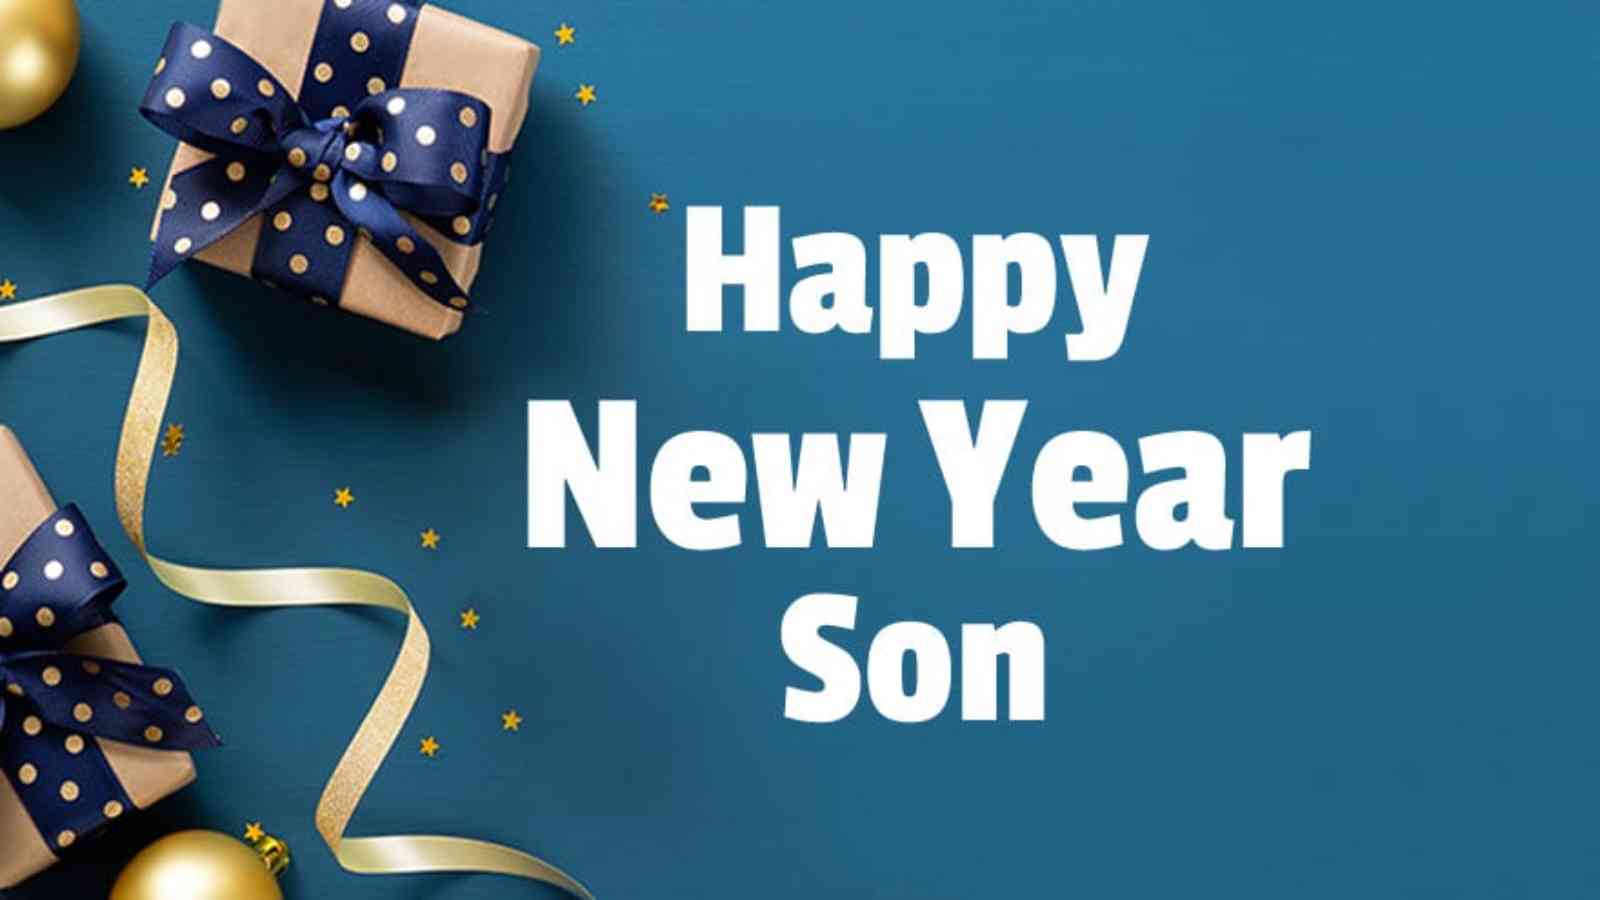 Best New Year's Greetings for Son in 2023